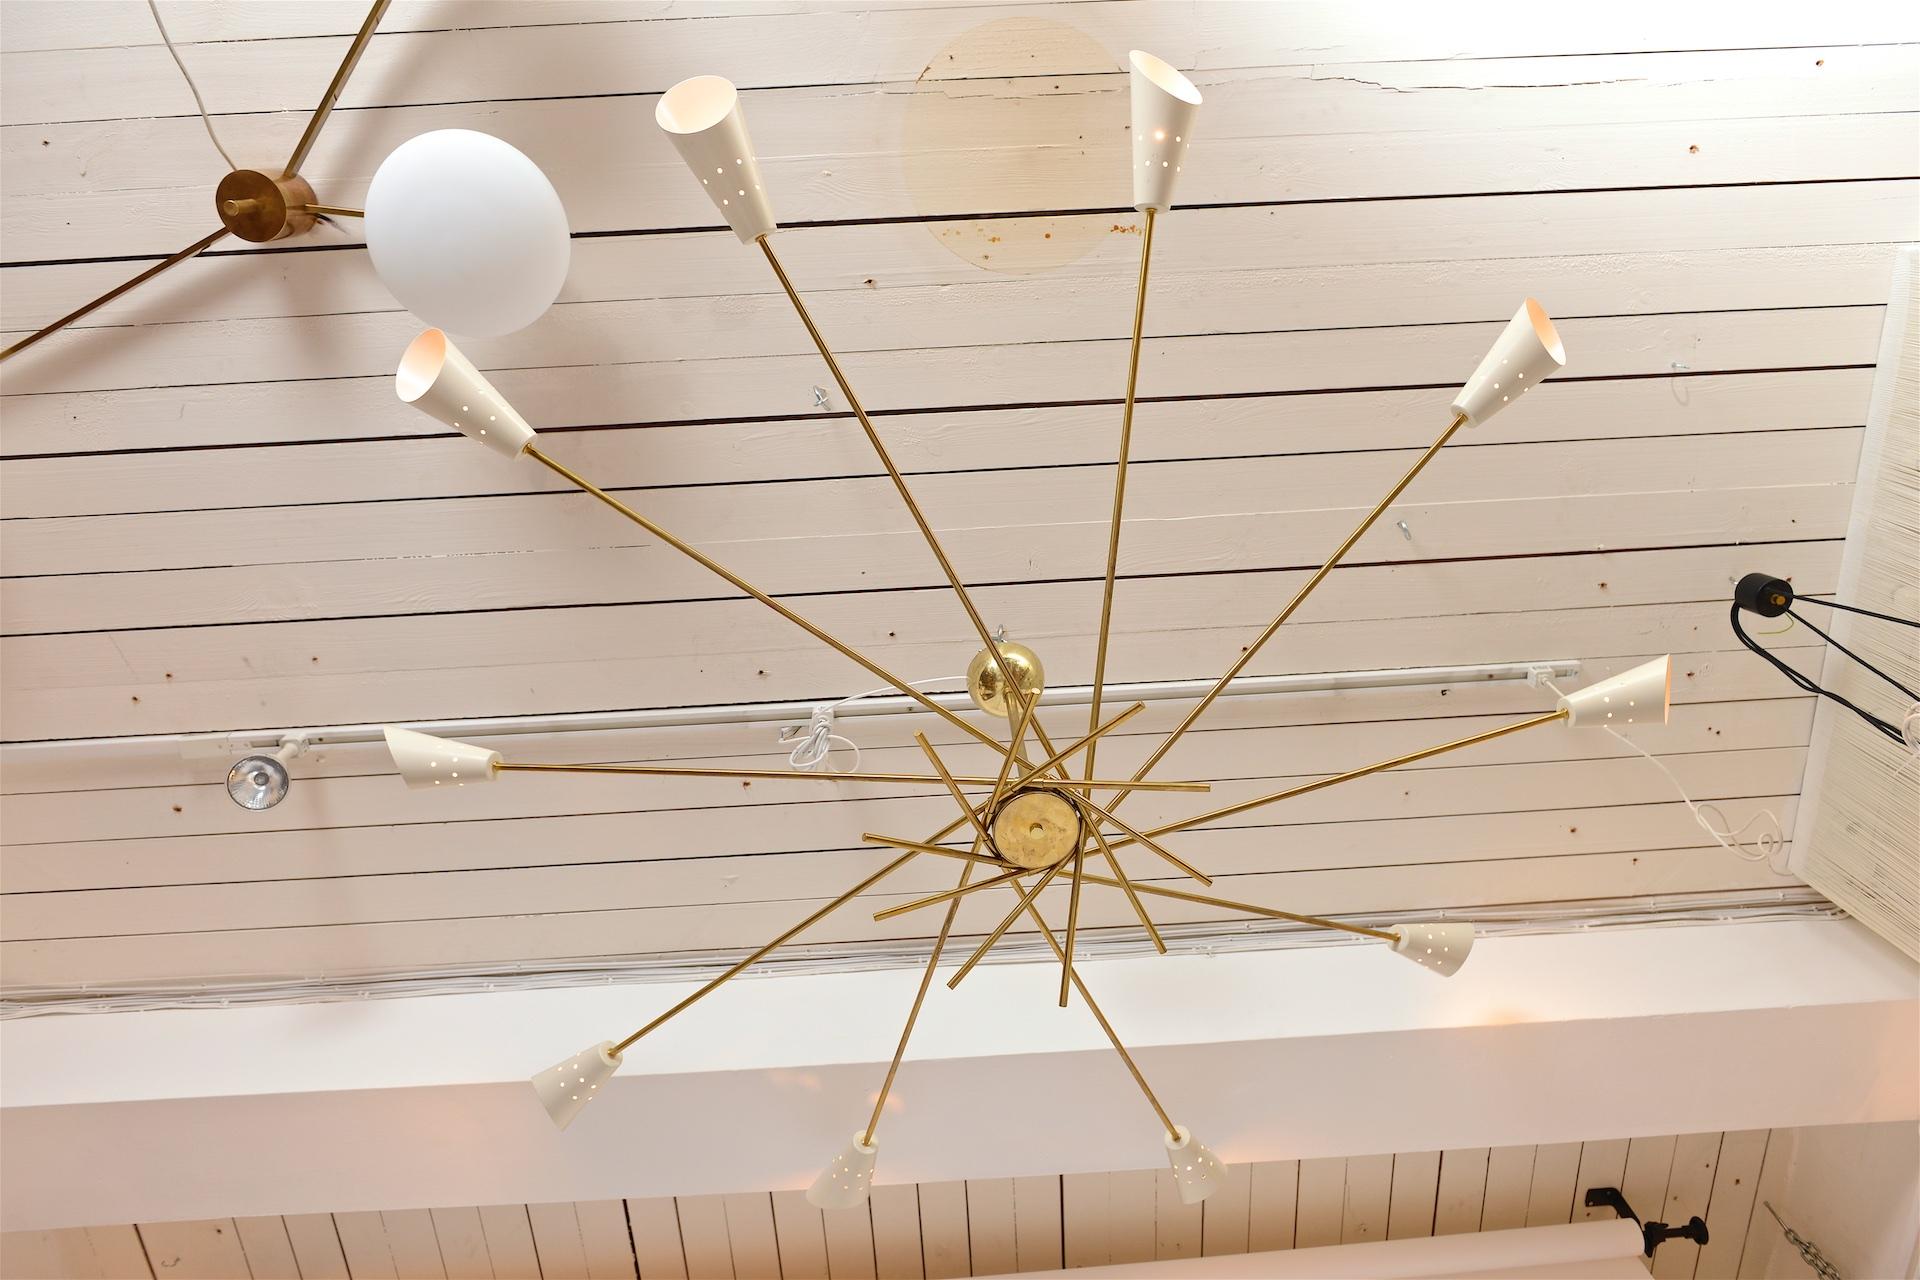 Brass and painted aluminium chandelier with 10 lights

Contemporary Sputnik like take on the style of 1950s Italian lights commonly attributed to Stilnovo

Drop can be as required with minimum at 45cm

Closes just like an umbrella for easy